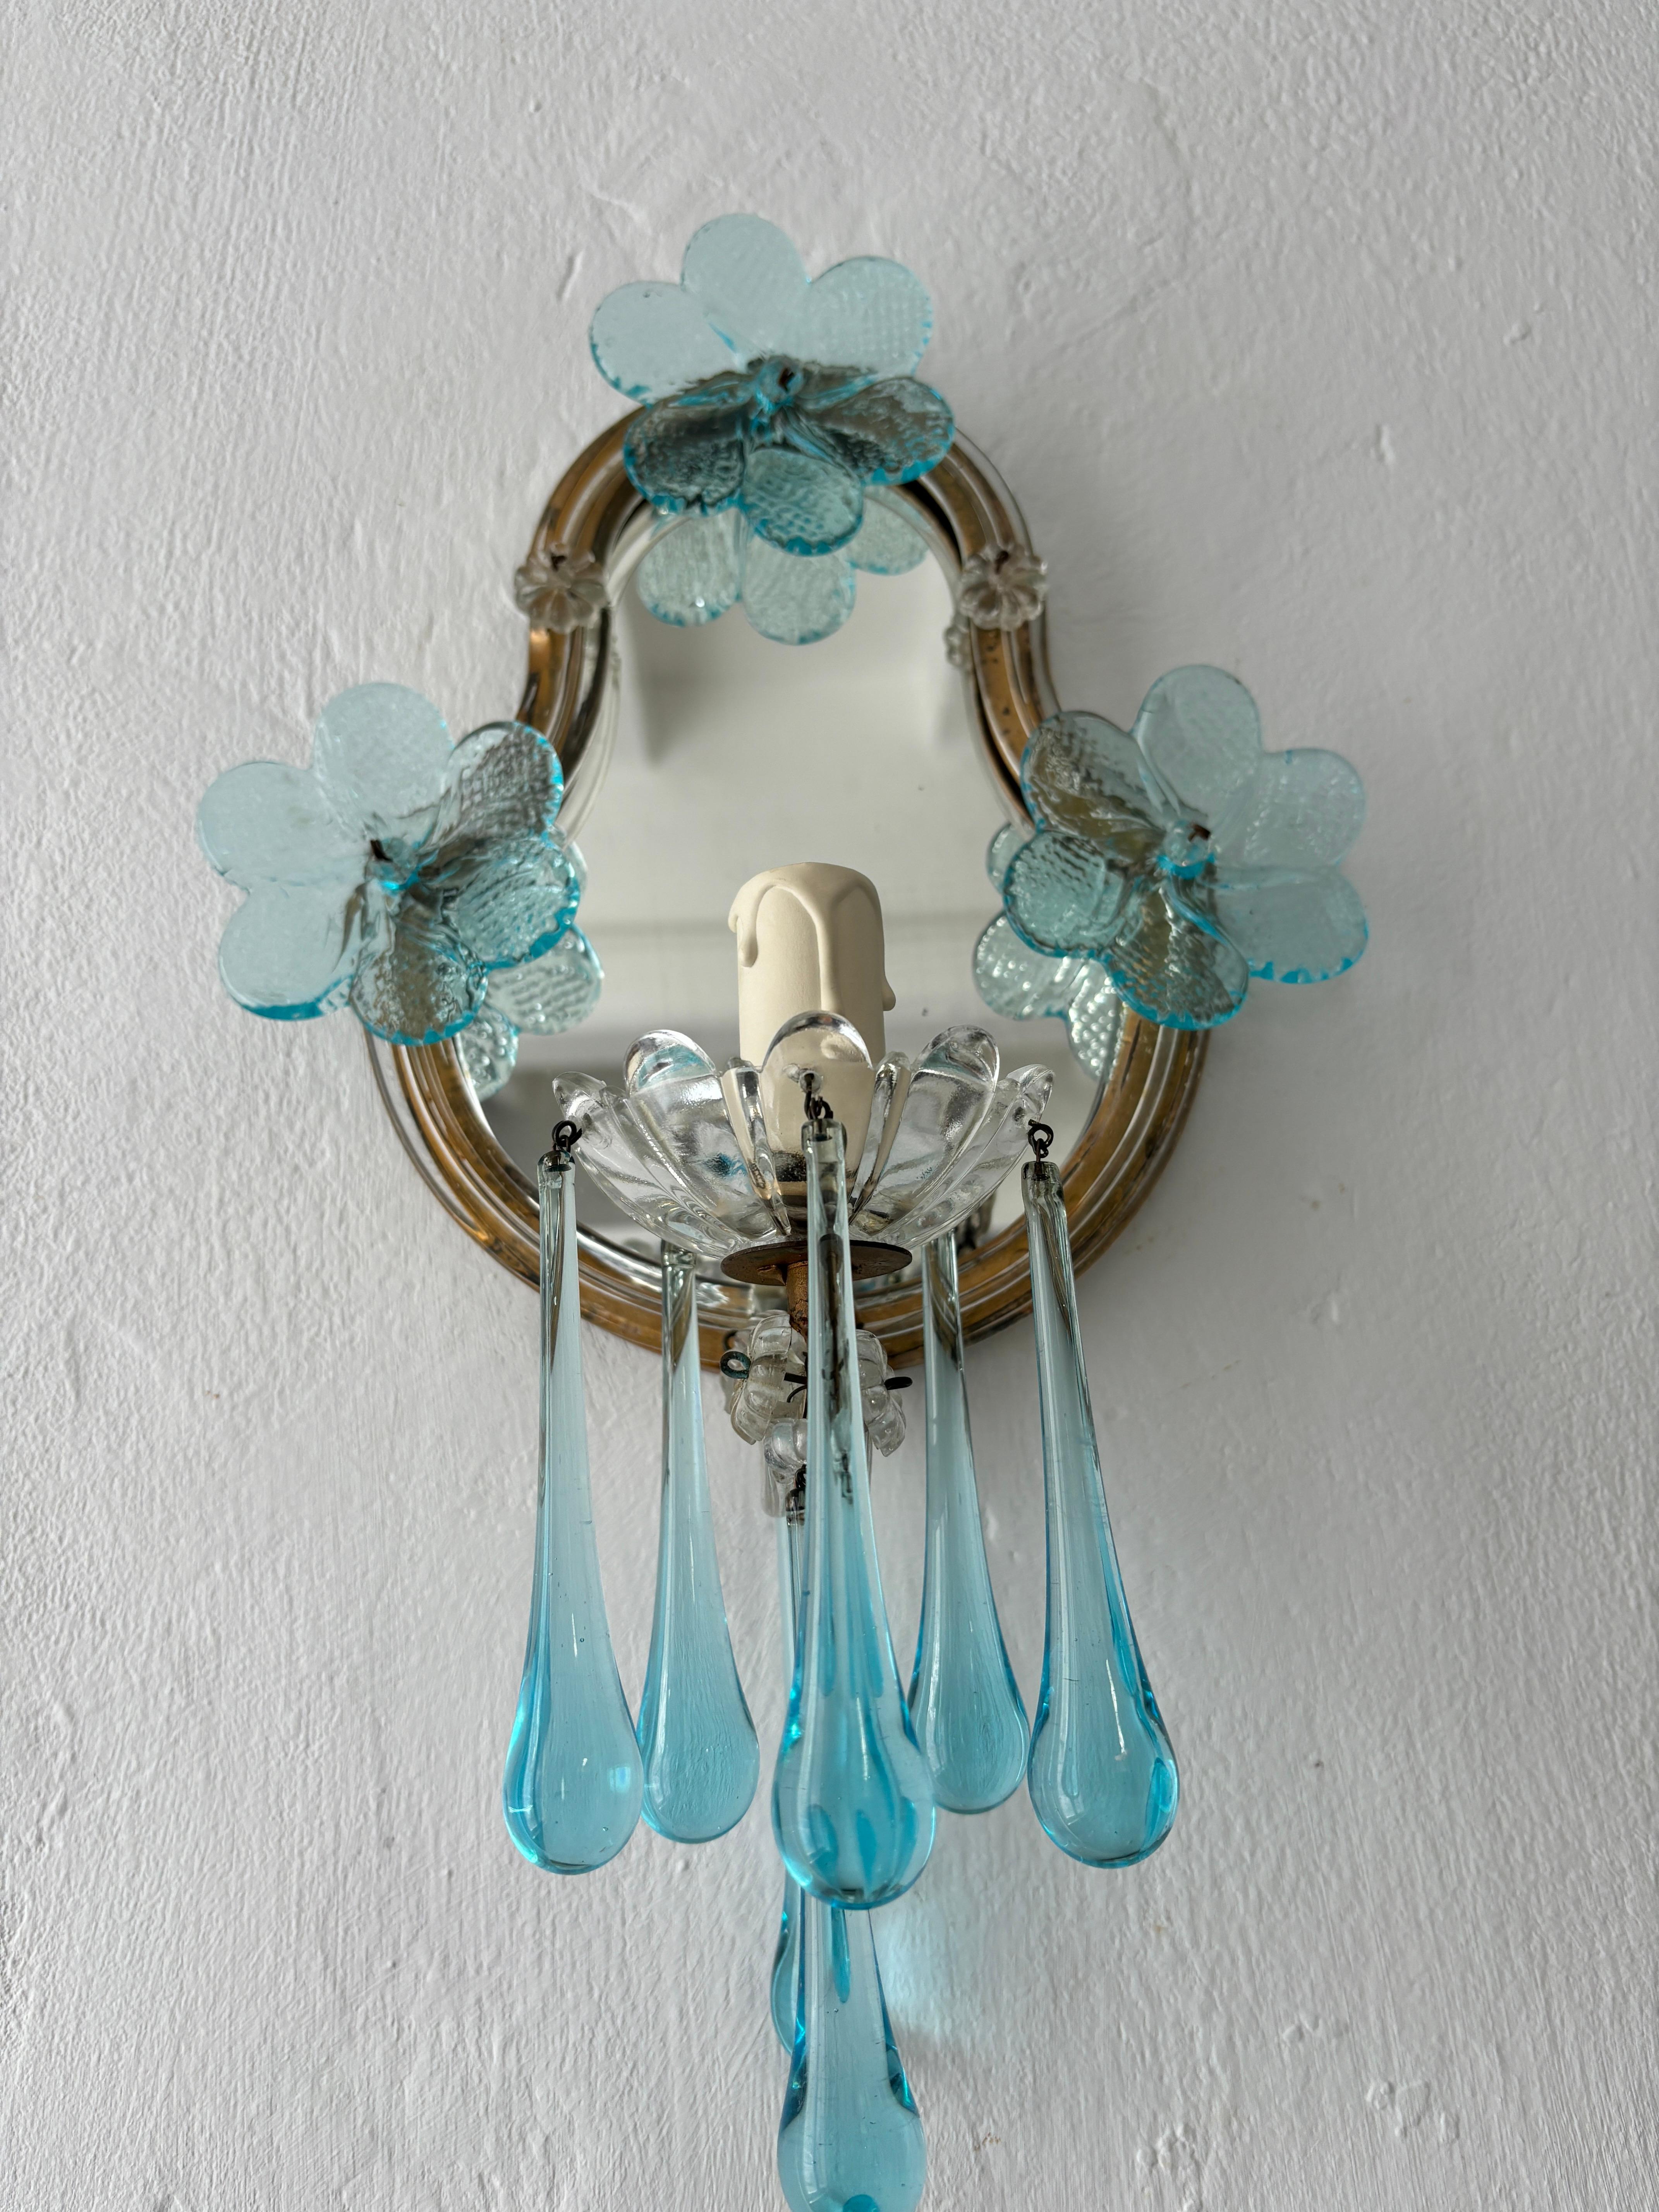 Early 20th Century 1920s French Rare Aqua Blue Murano Glass Drops & Flowers Mirrored Sconces For Sale